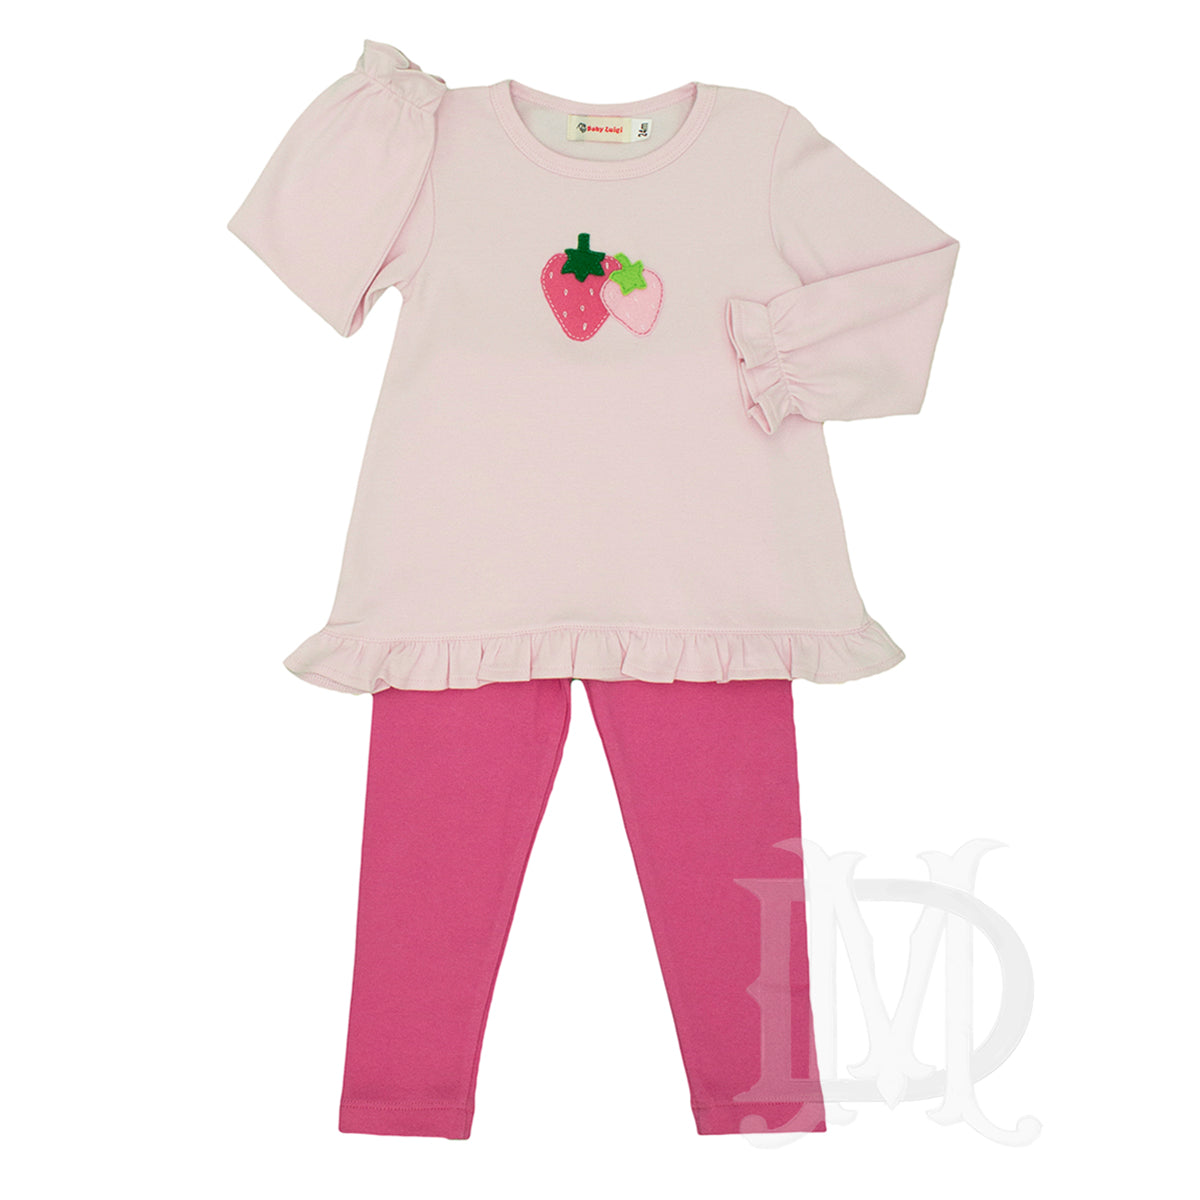 Little Girl's Strawberry Patch Appliqued Set by Luigi